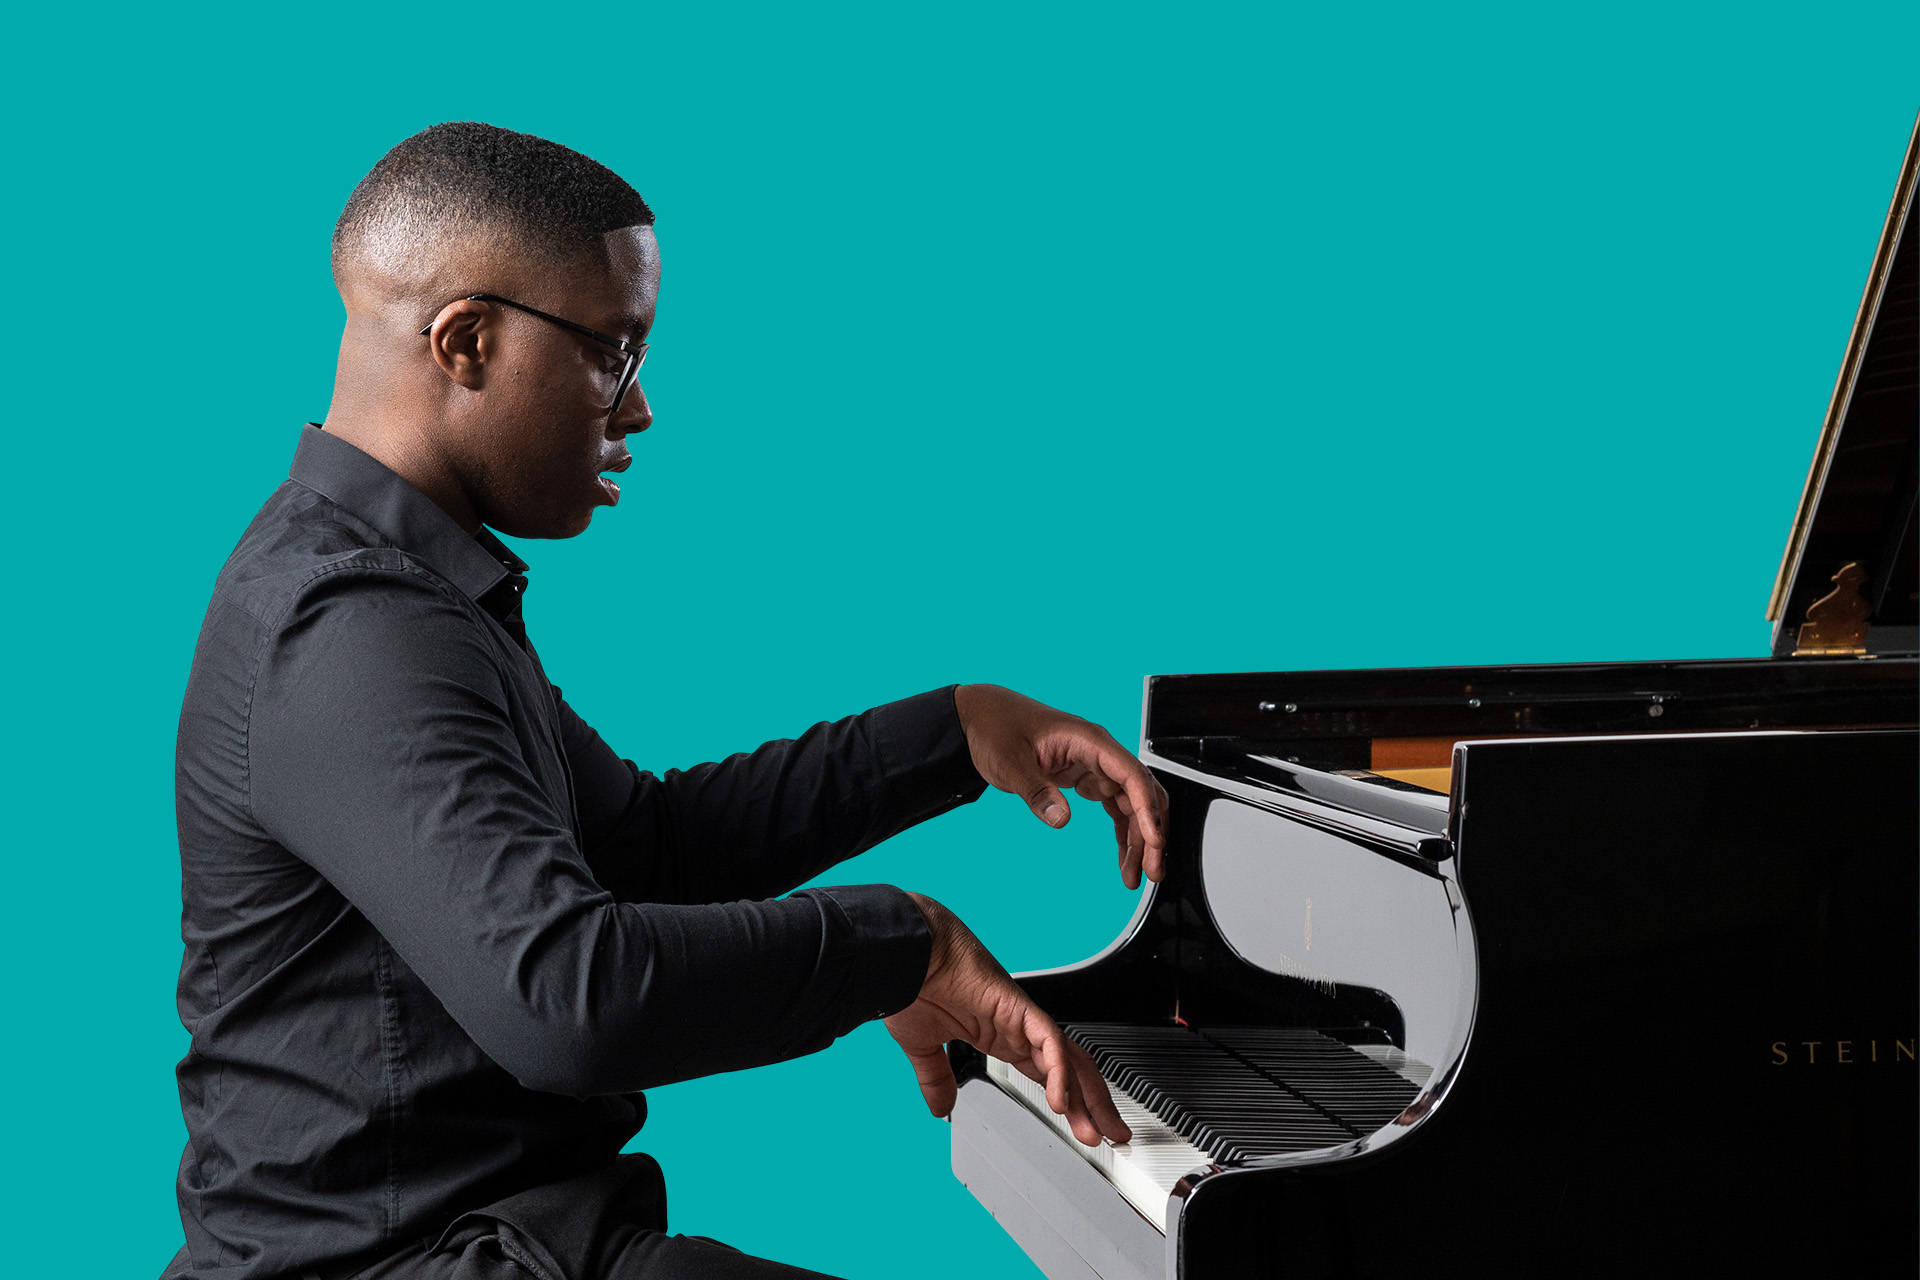 A male students wearing a black shirt playing the piano against a teal background